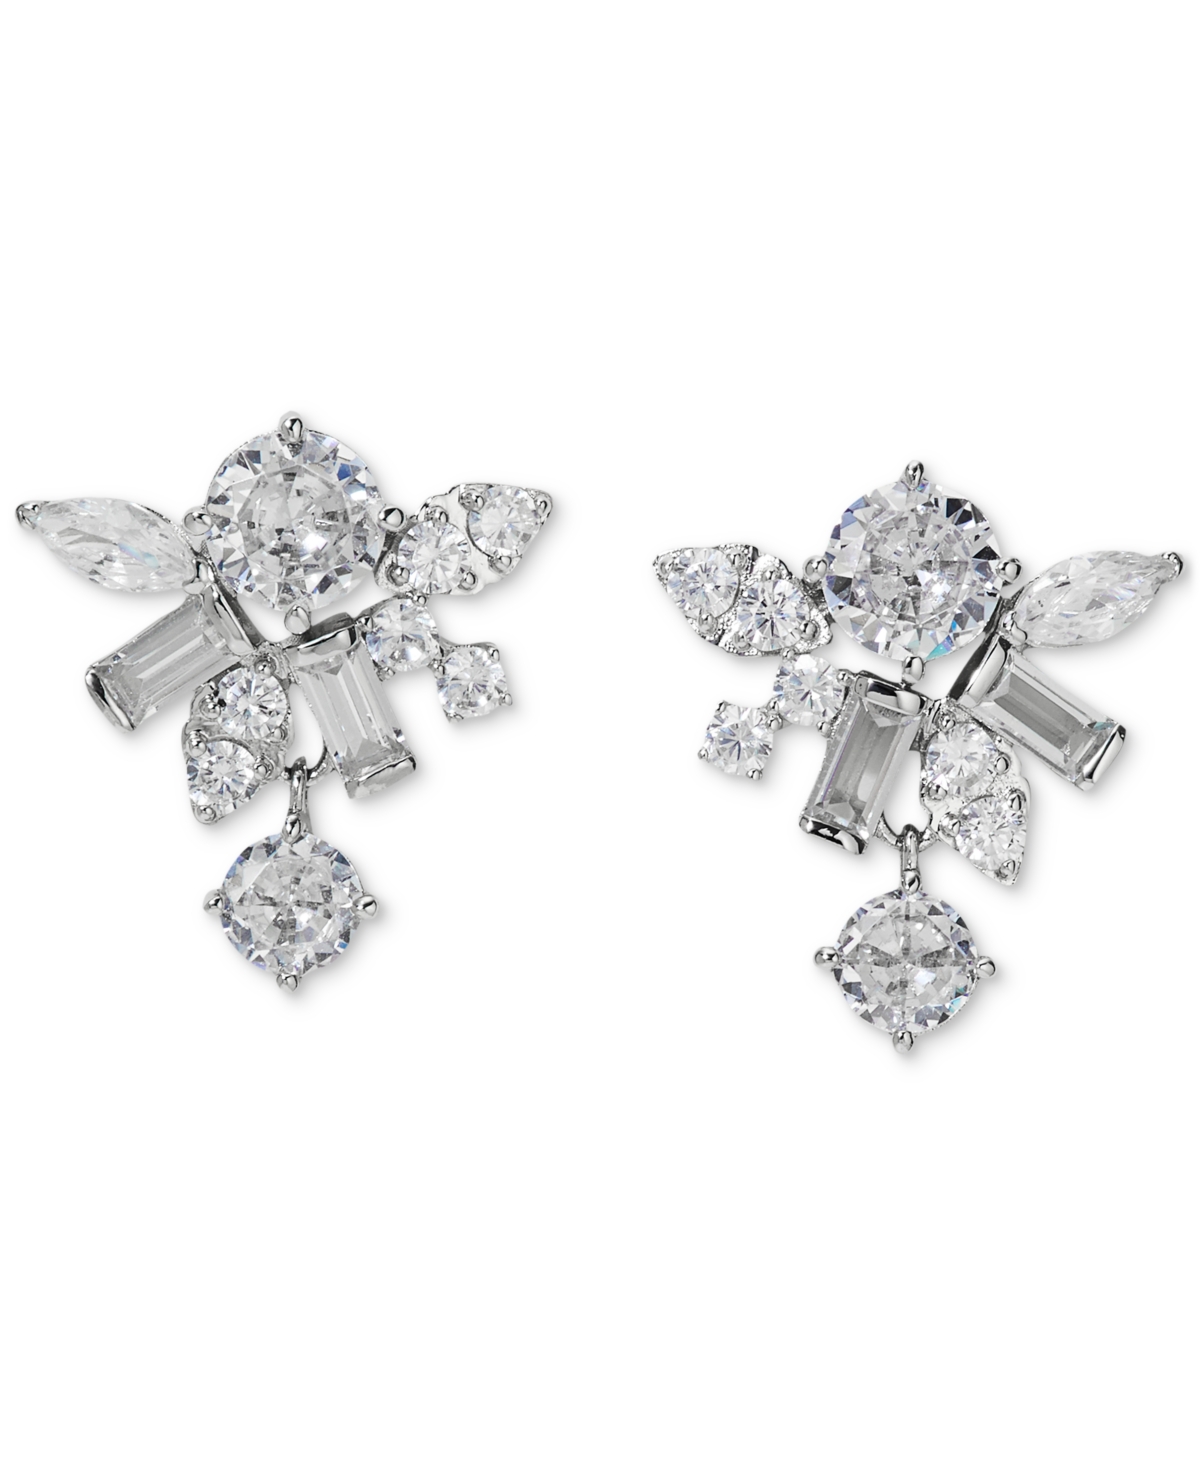 Silver-Tone Mixed Cubic Zirconia Cluster Stud Earrings, Created for Macy's - Rhodium